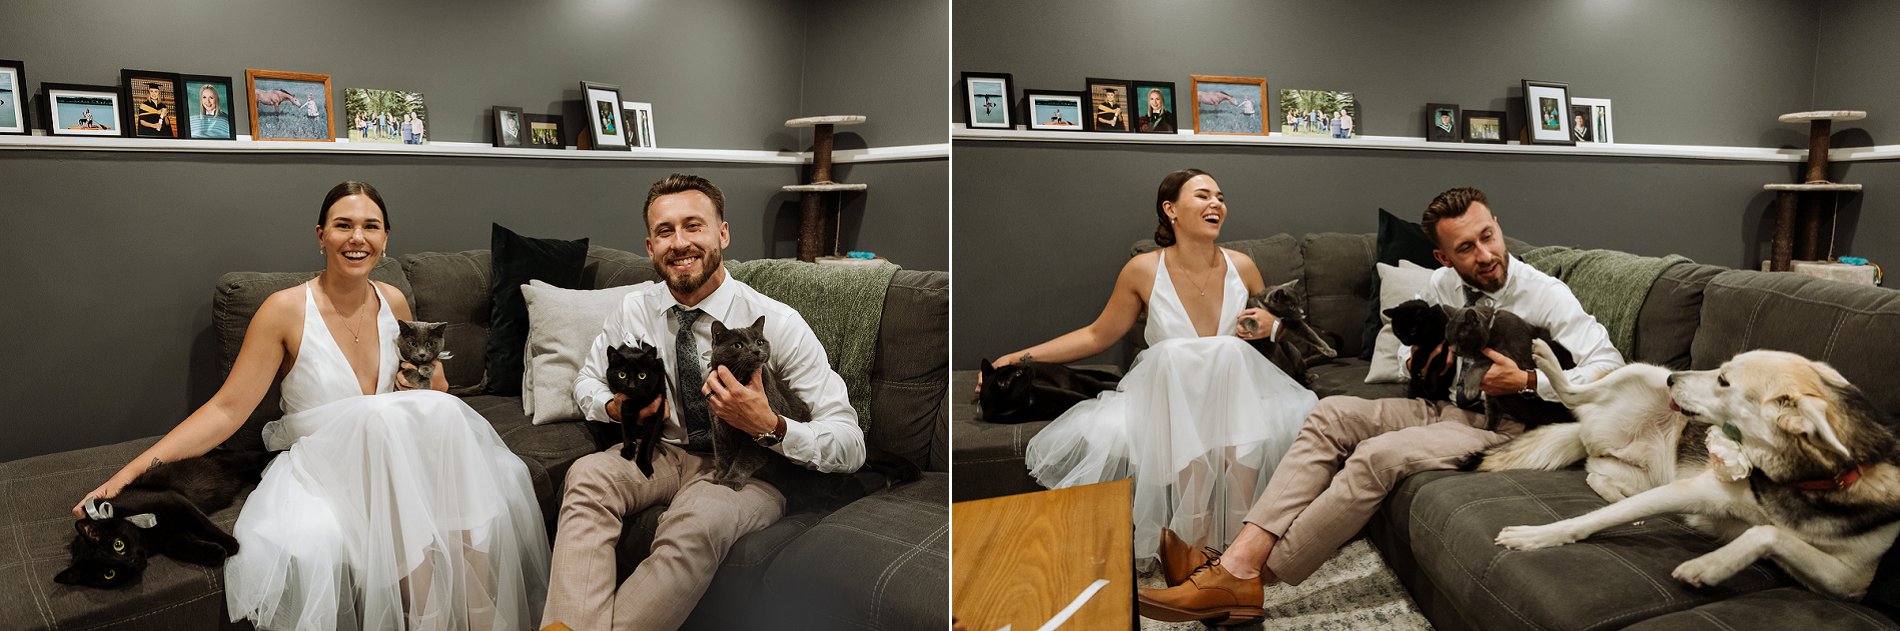 A Saskatoon bride and groom pose for a family photo with their four cats.